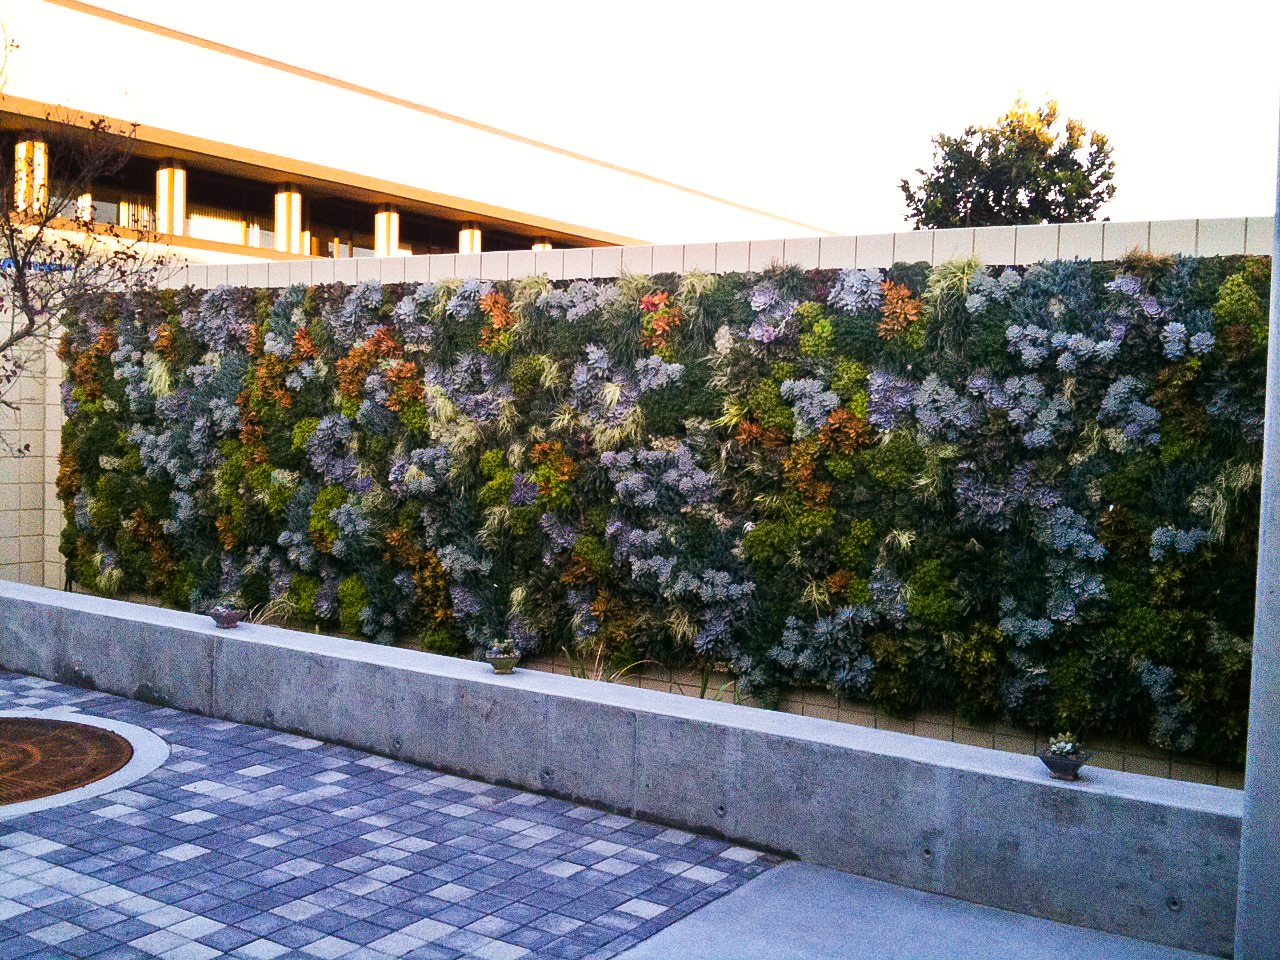 The Good Earth Plant Company living wall at the SDGE Energy Innovation Center is one of our favorite projects. See it at the USGBC Green Building Expo on September 22.